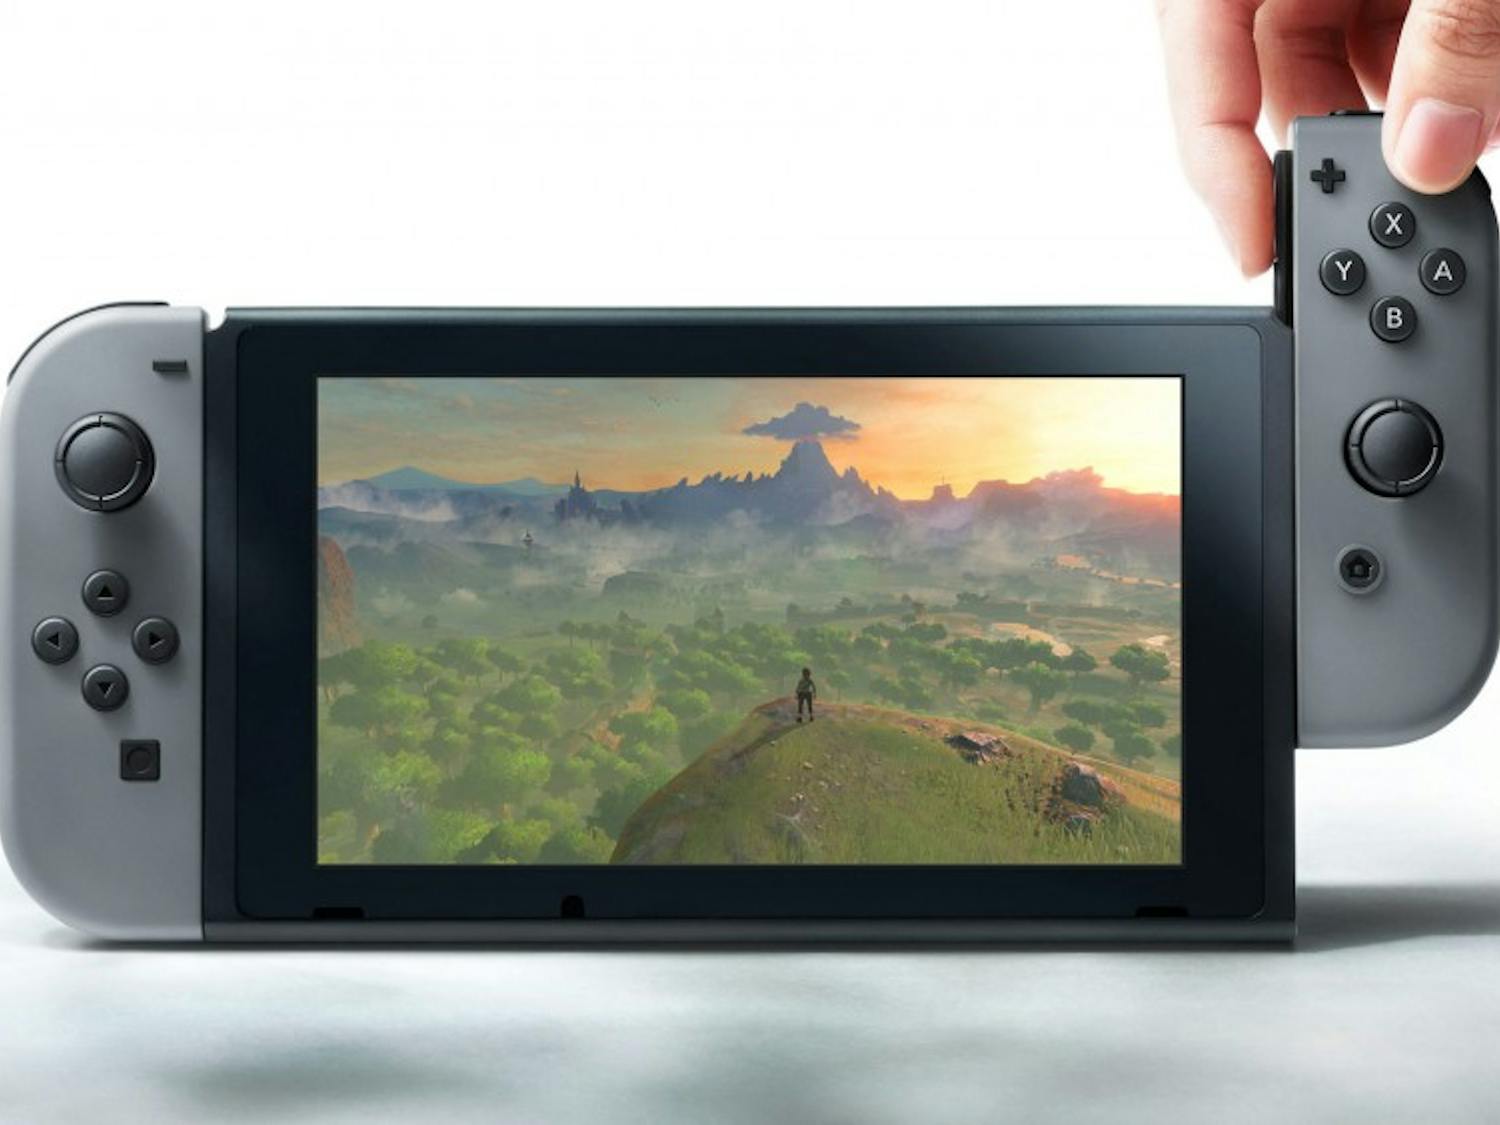 The Switch from Nintendo combines the mobility of a handheld with the power of a home gaming system to enable new video game play styles. It will be available in March 2017. (Handout/TNS)